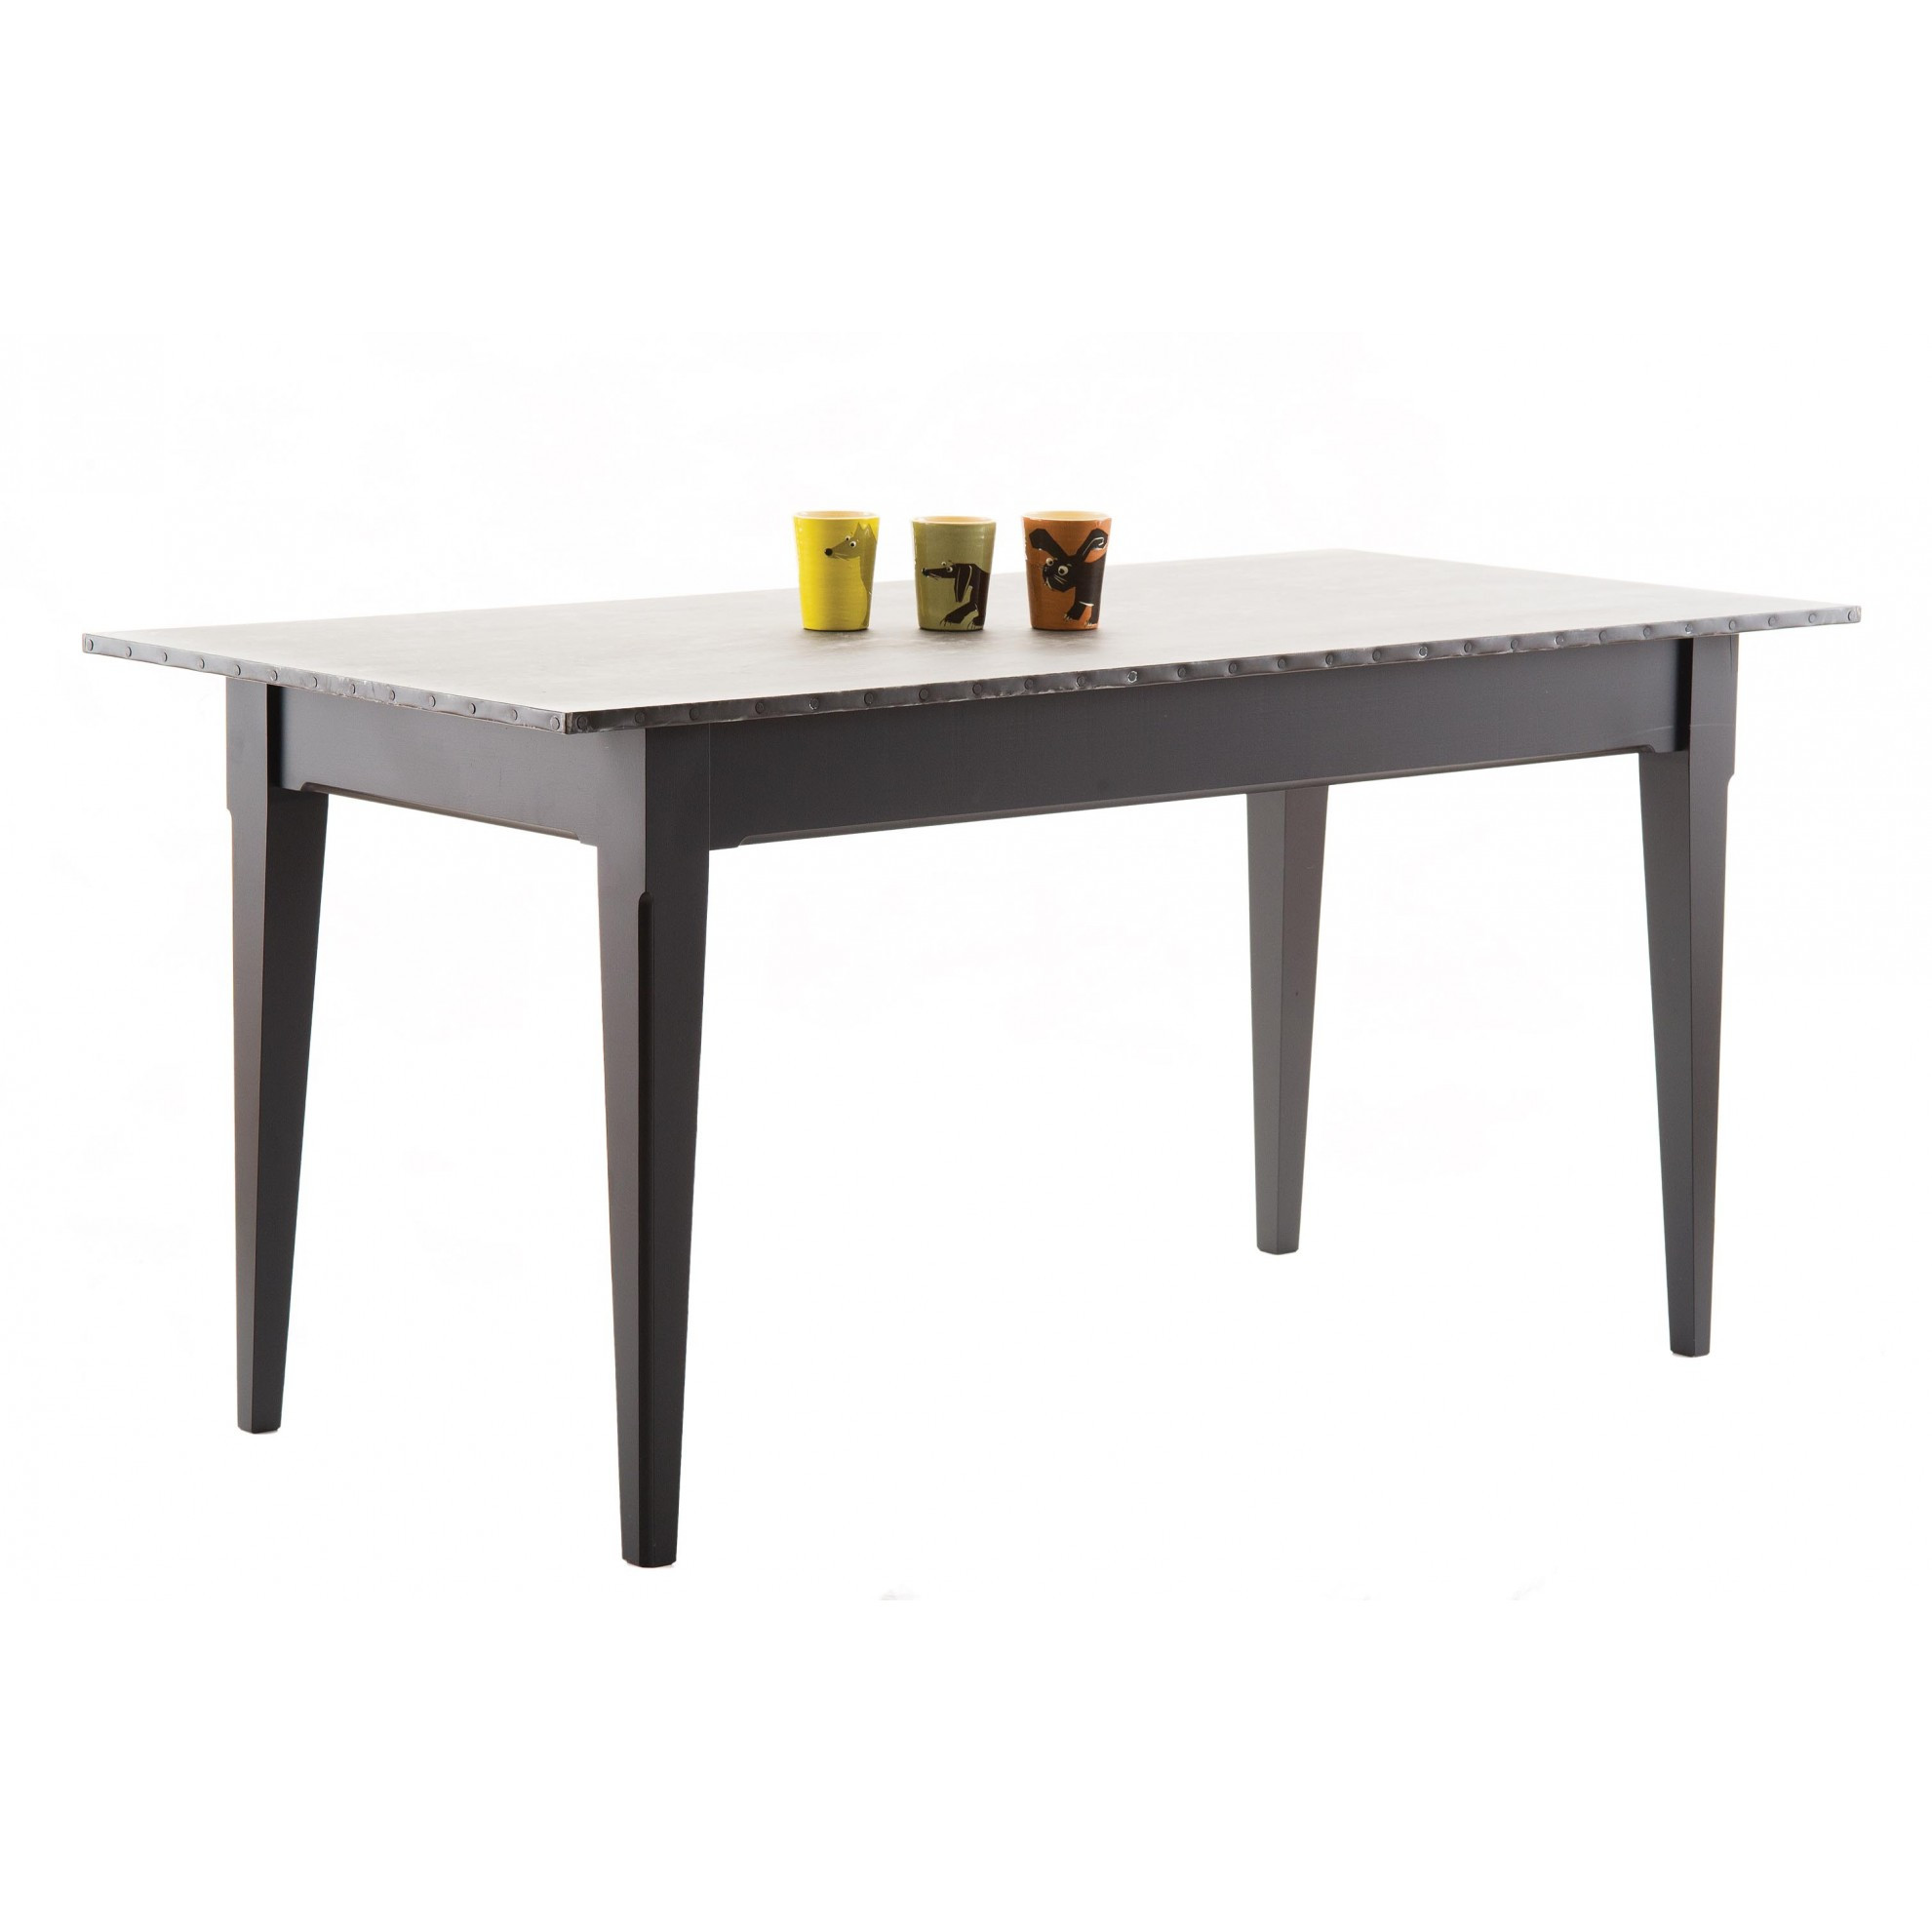 Small Rectangle Kitchen Table
 Small Rectangular Kitchen Table – HomesFeed